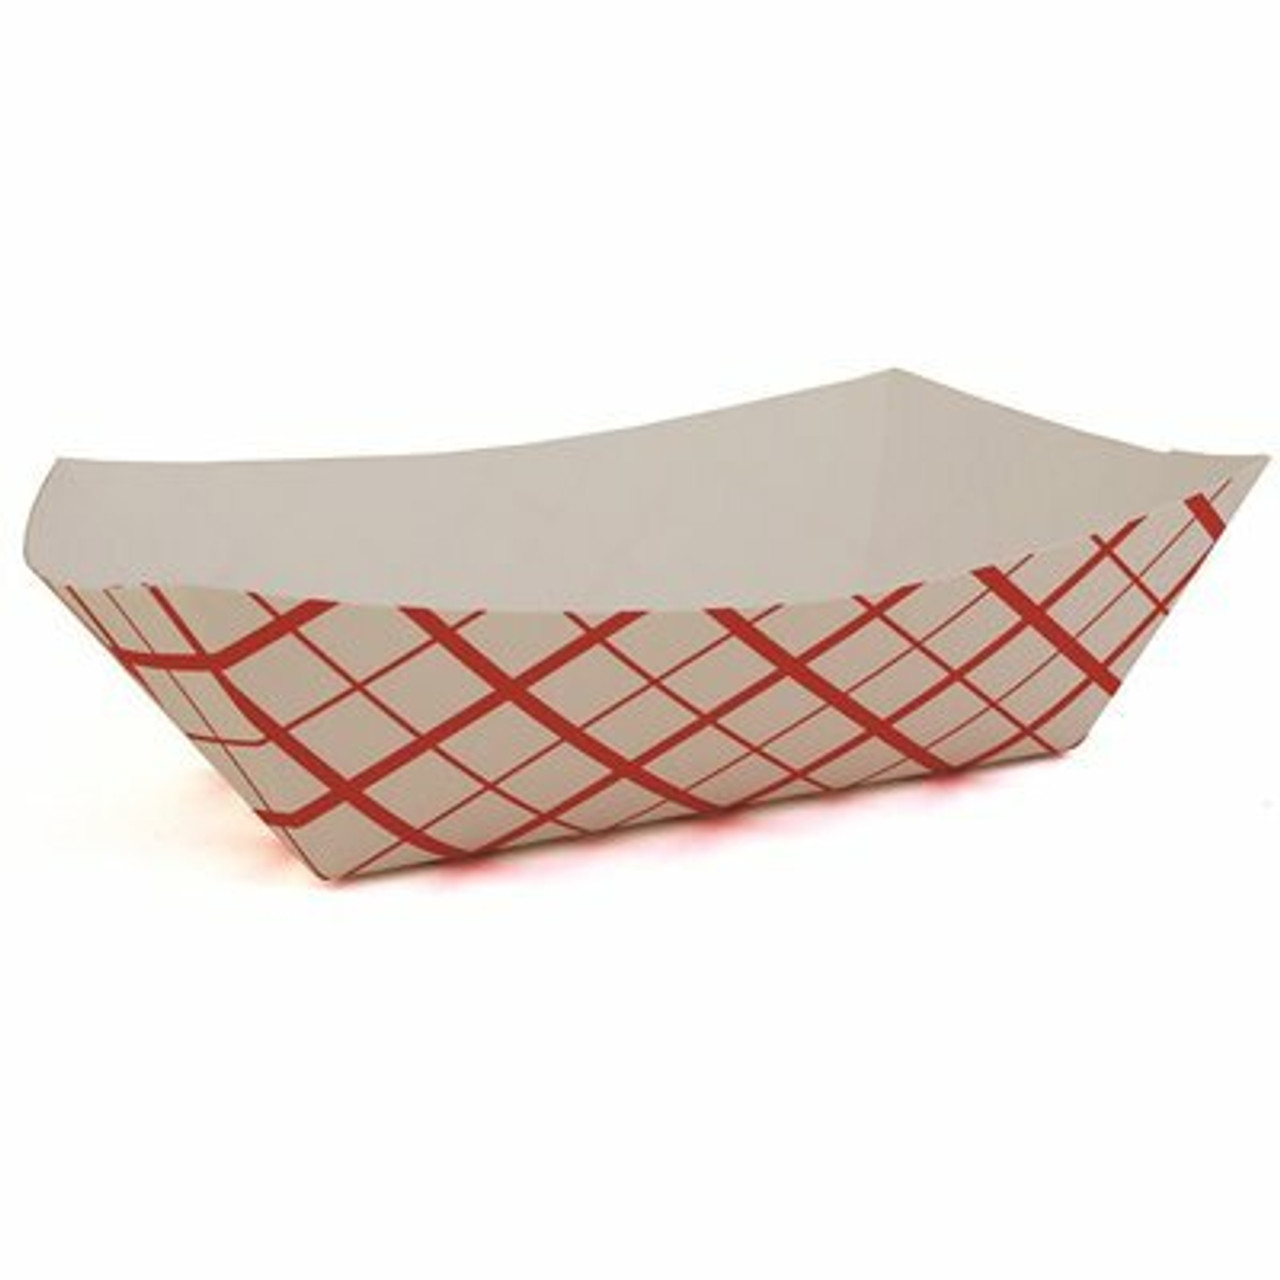 Southland #1000 Red Check 10 Lb. Food Tray (250 Per Case)